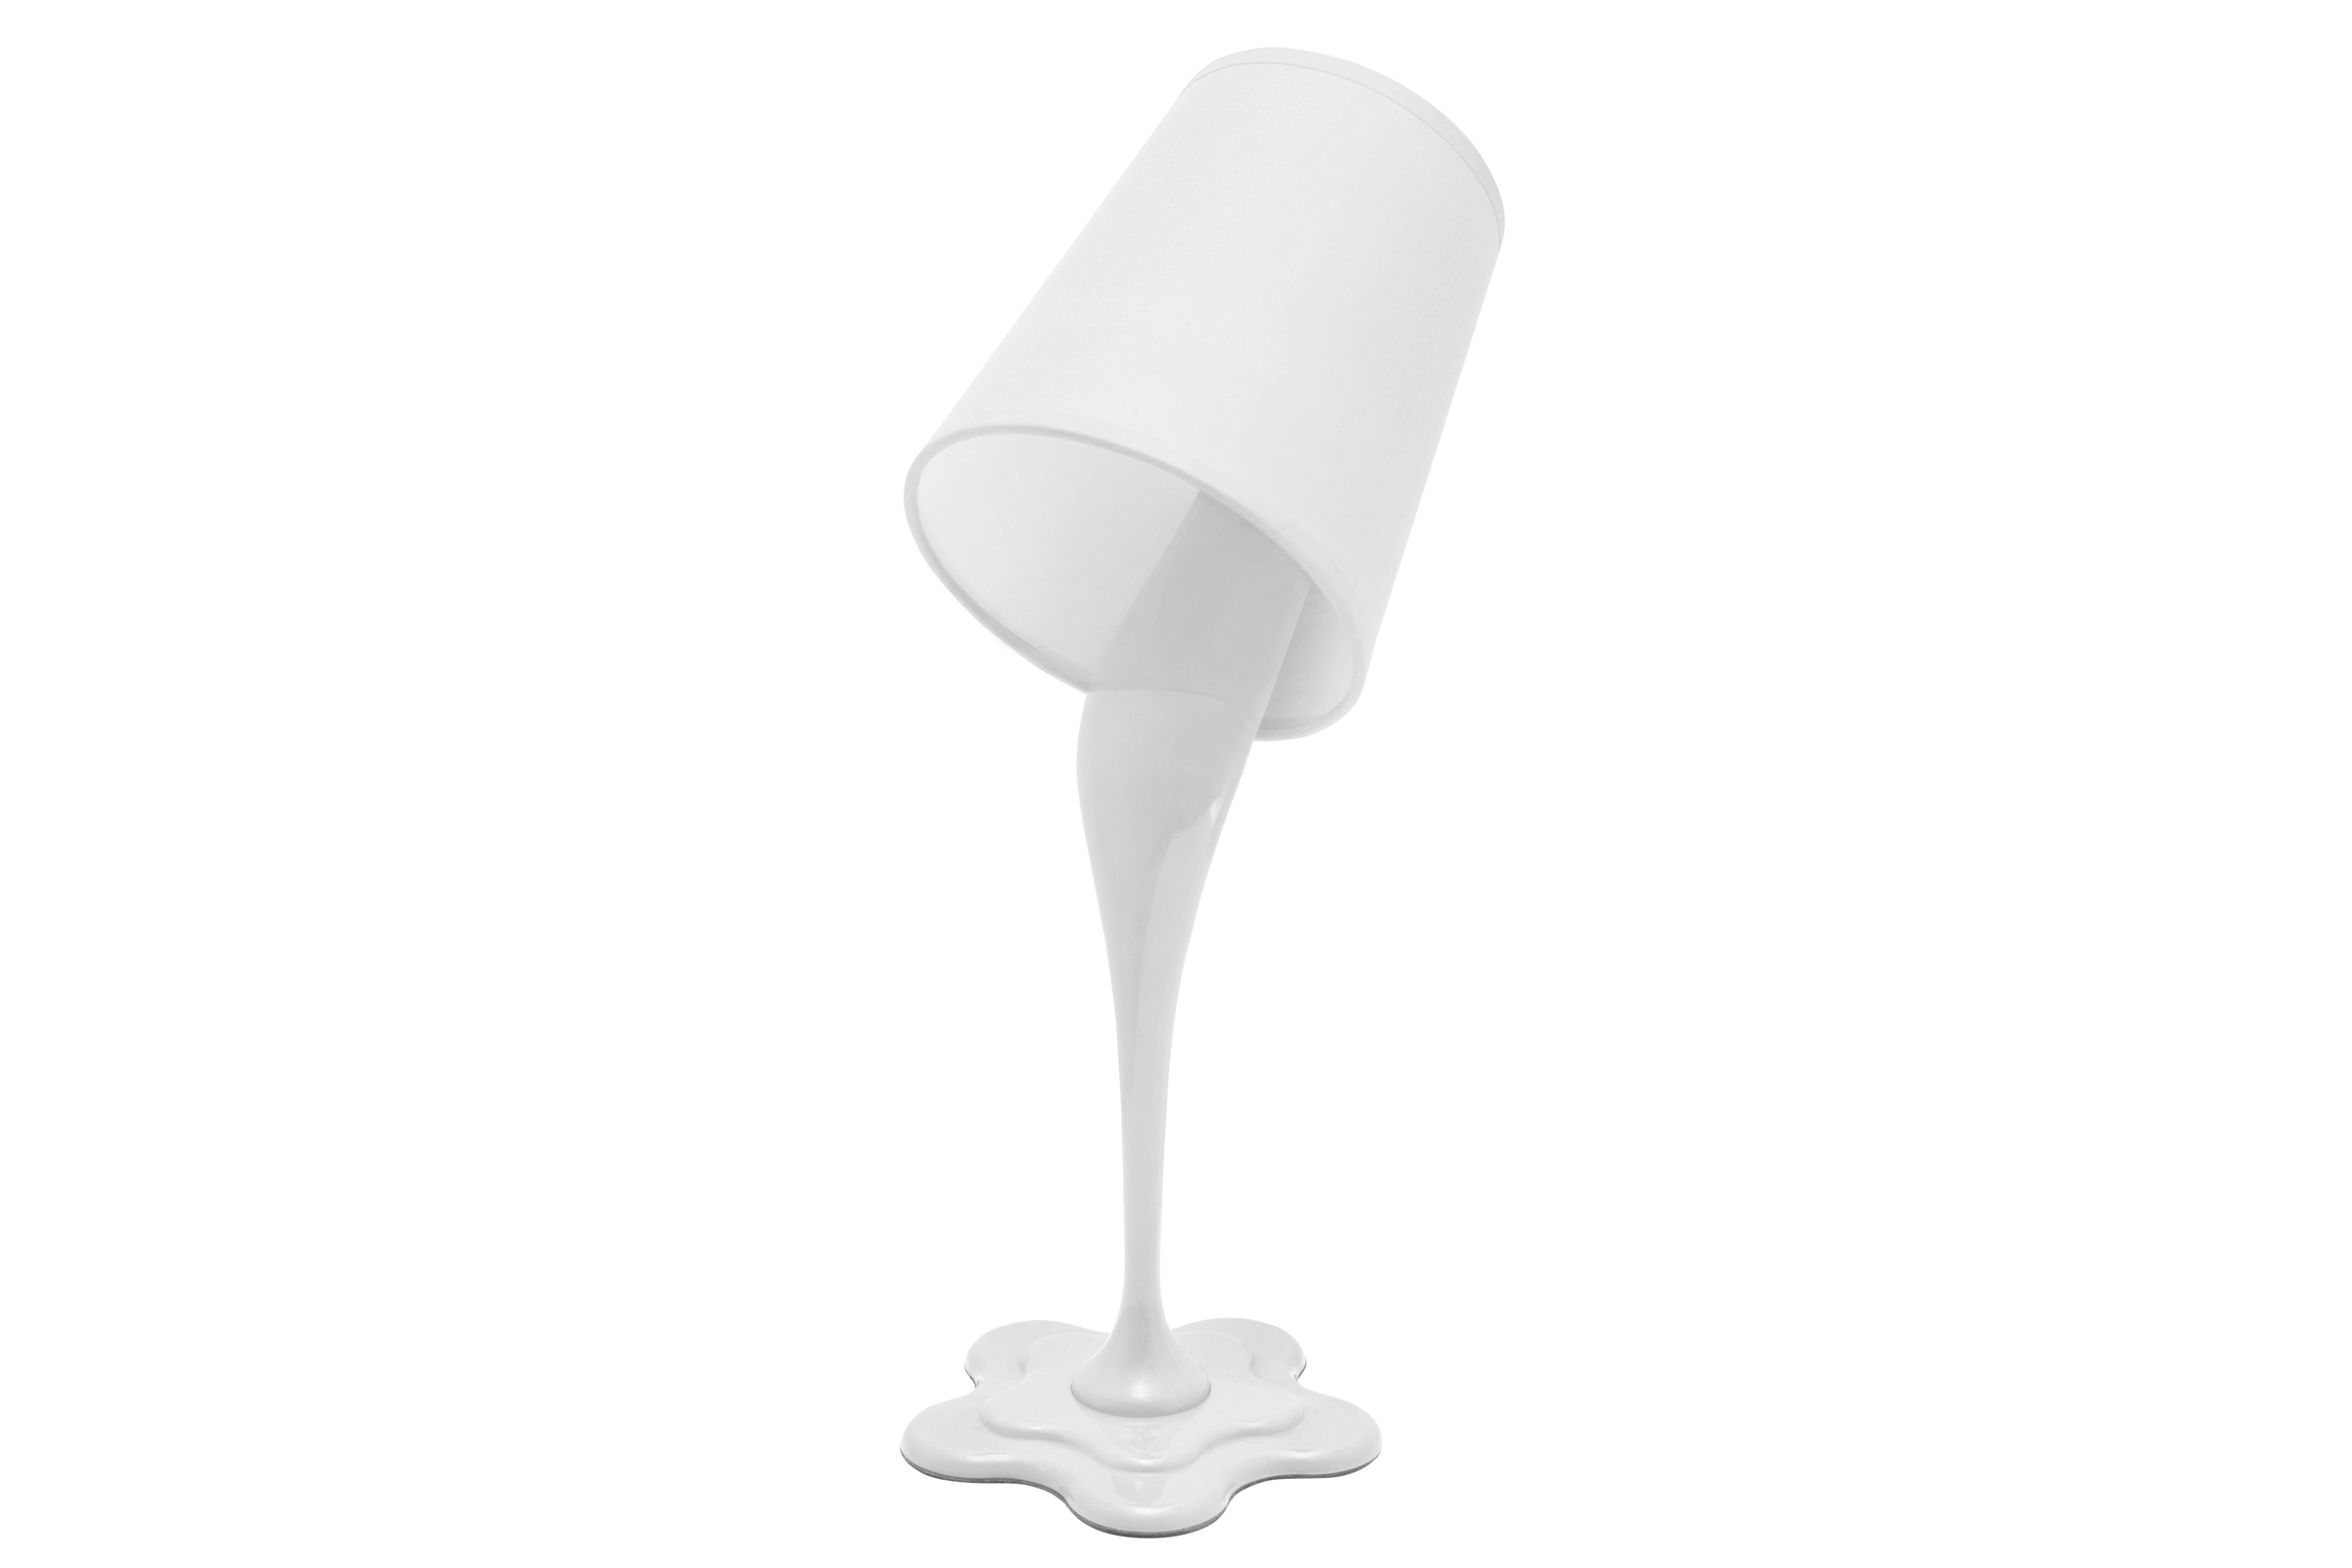 Woopsy White Lamp By Lumisource At Gardner White